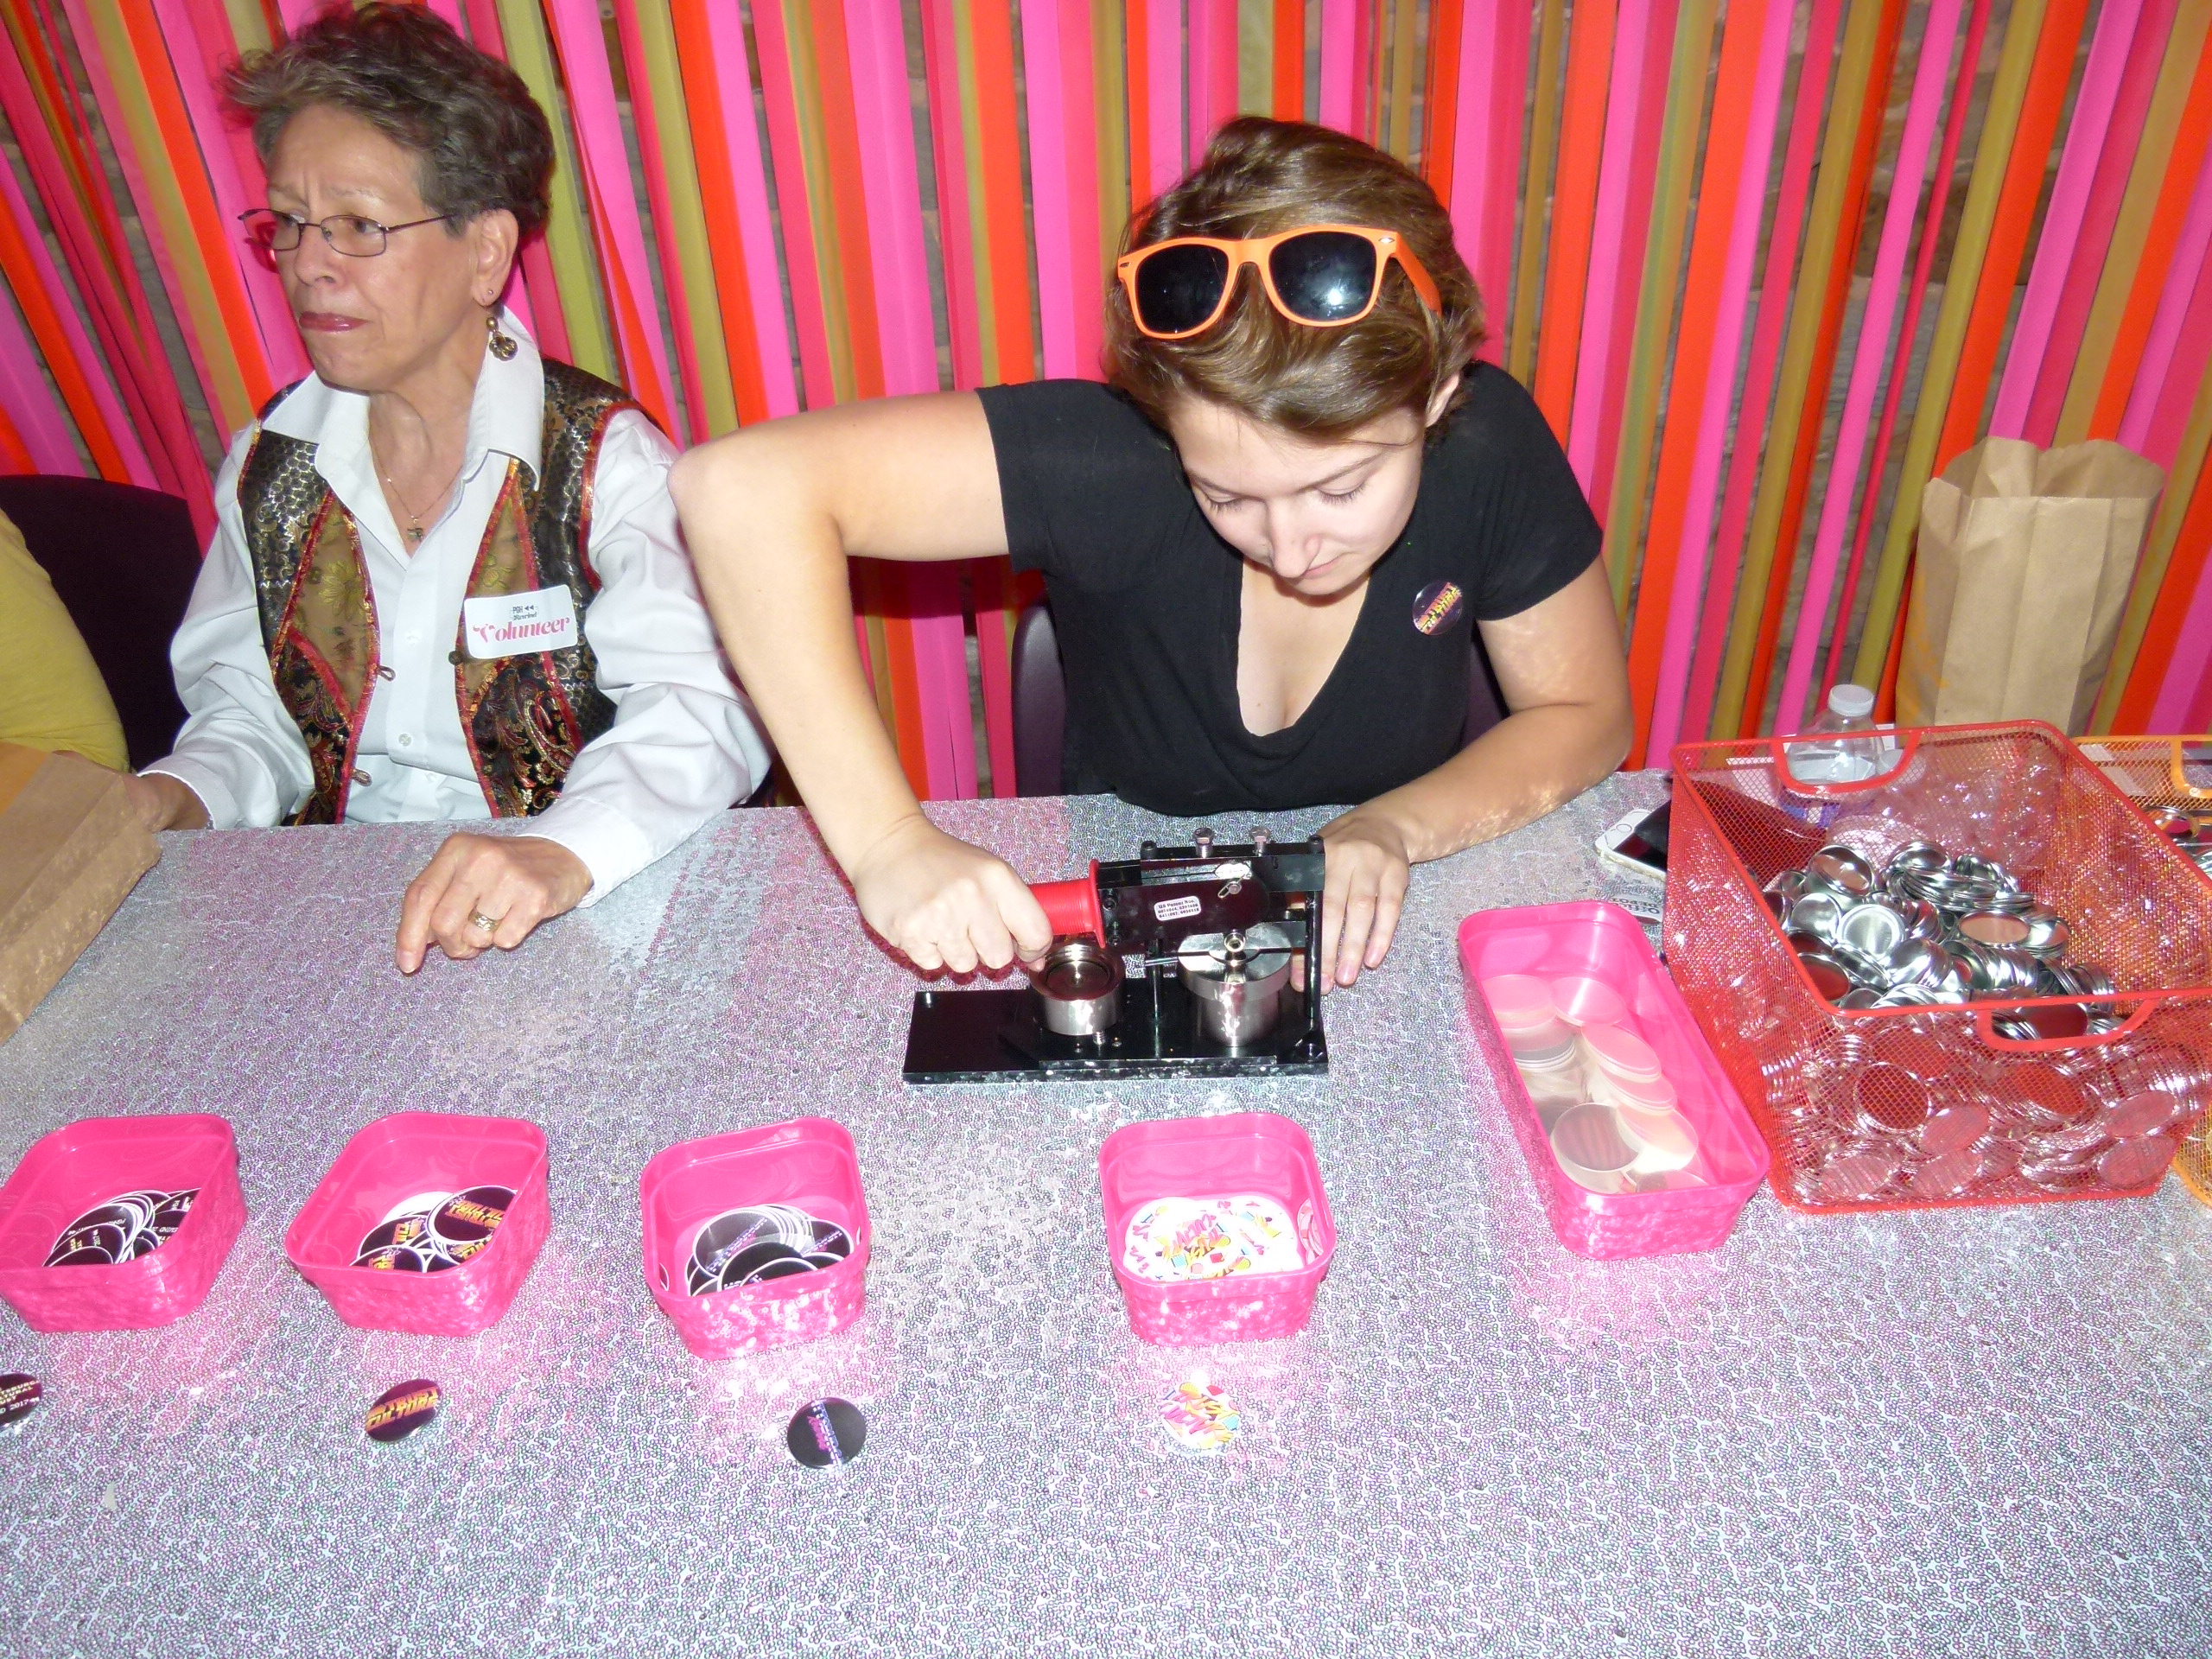 Megan Bresser making a button at the button-making station.